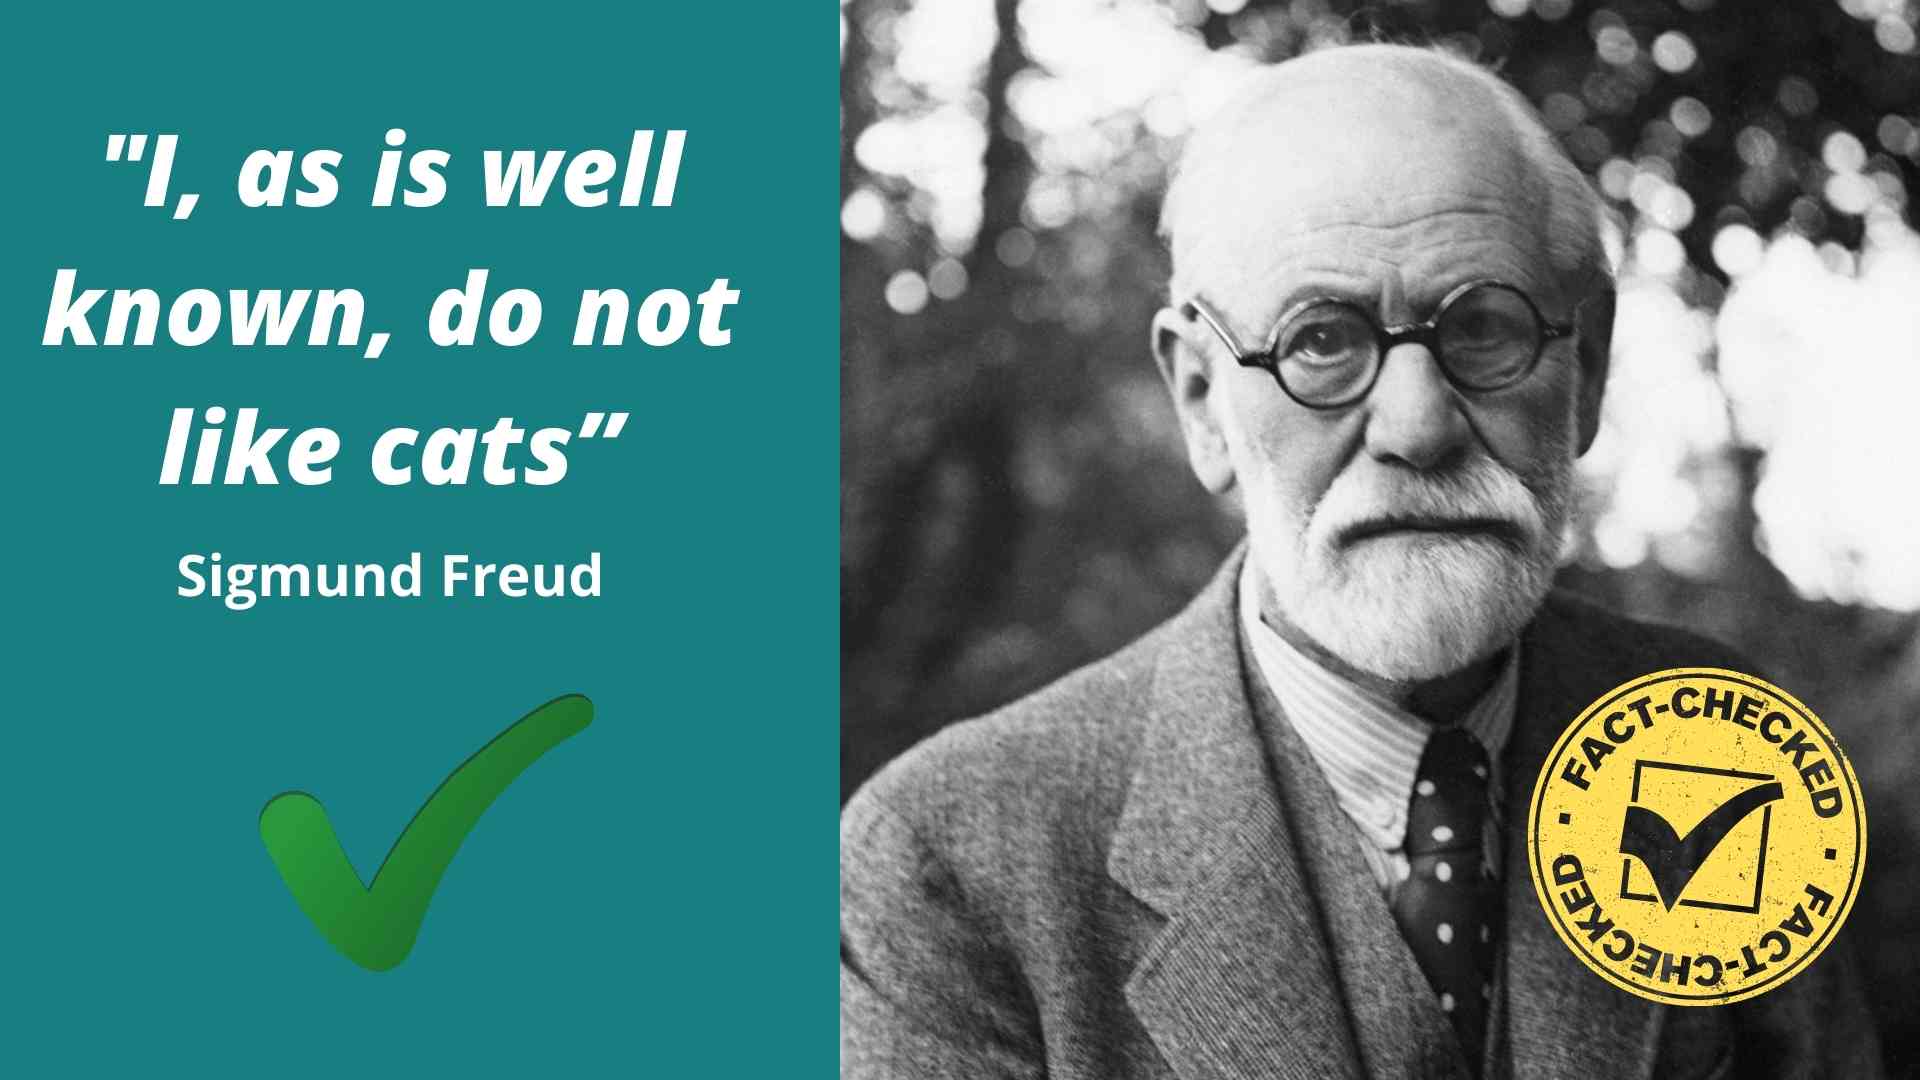 a fact checked sigmund freud quote